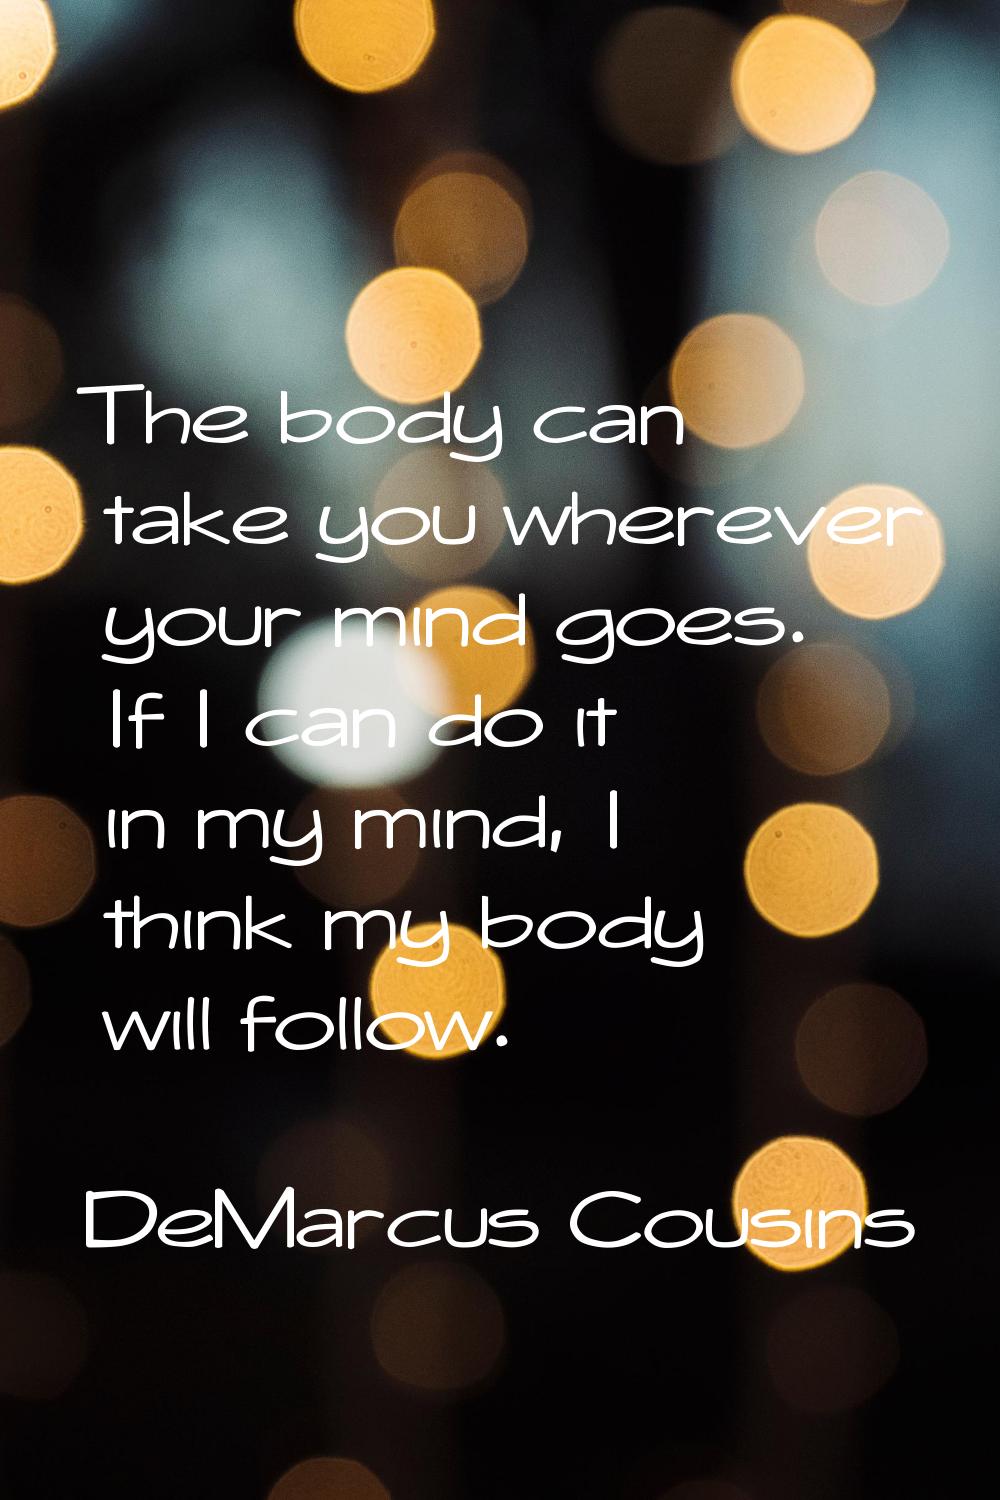 The body can take you wherever your mind goes. If I can do it in my mind, I think my body will foll